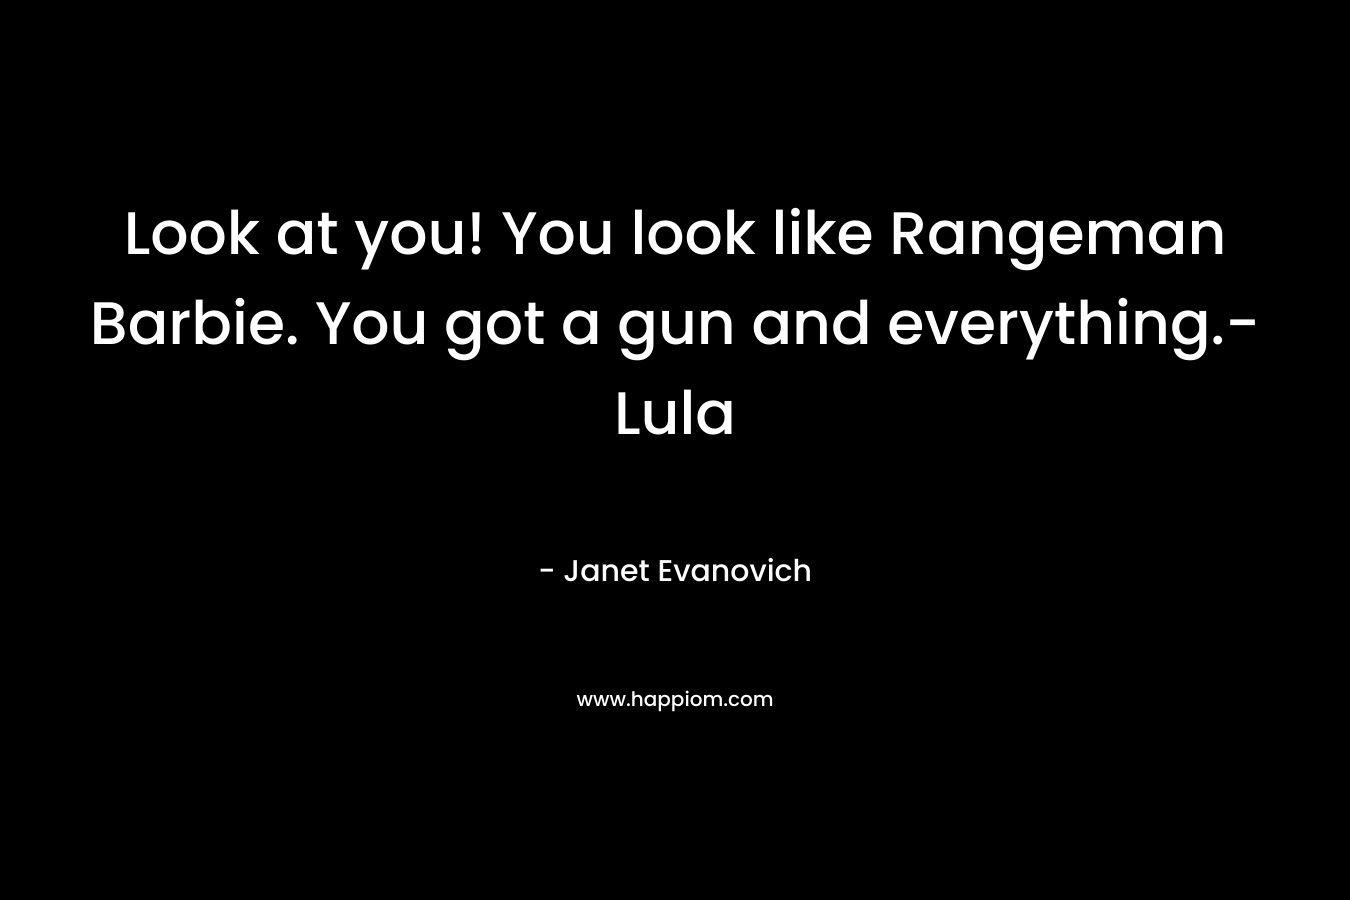 Look at you! You look like Rangeman Barbie. You got a gun and everything.-Lula